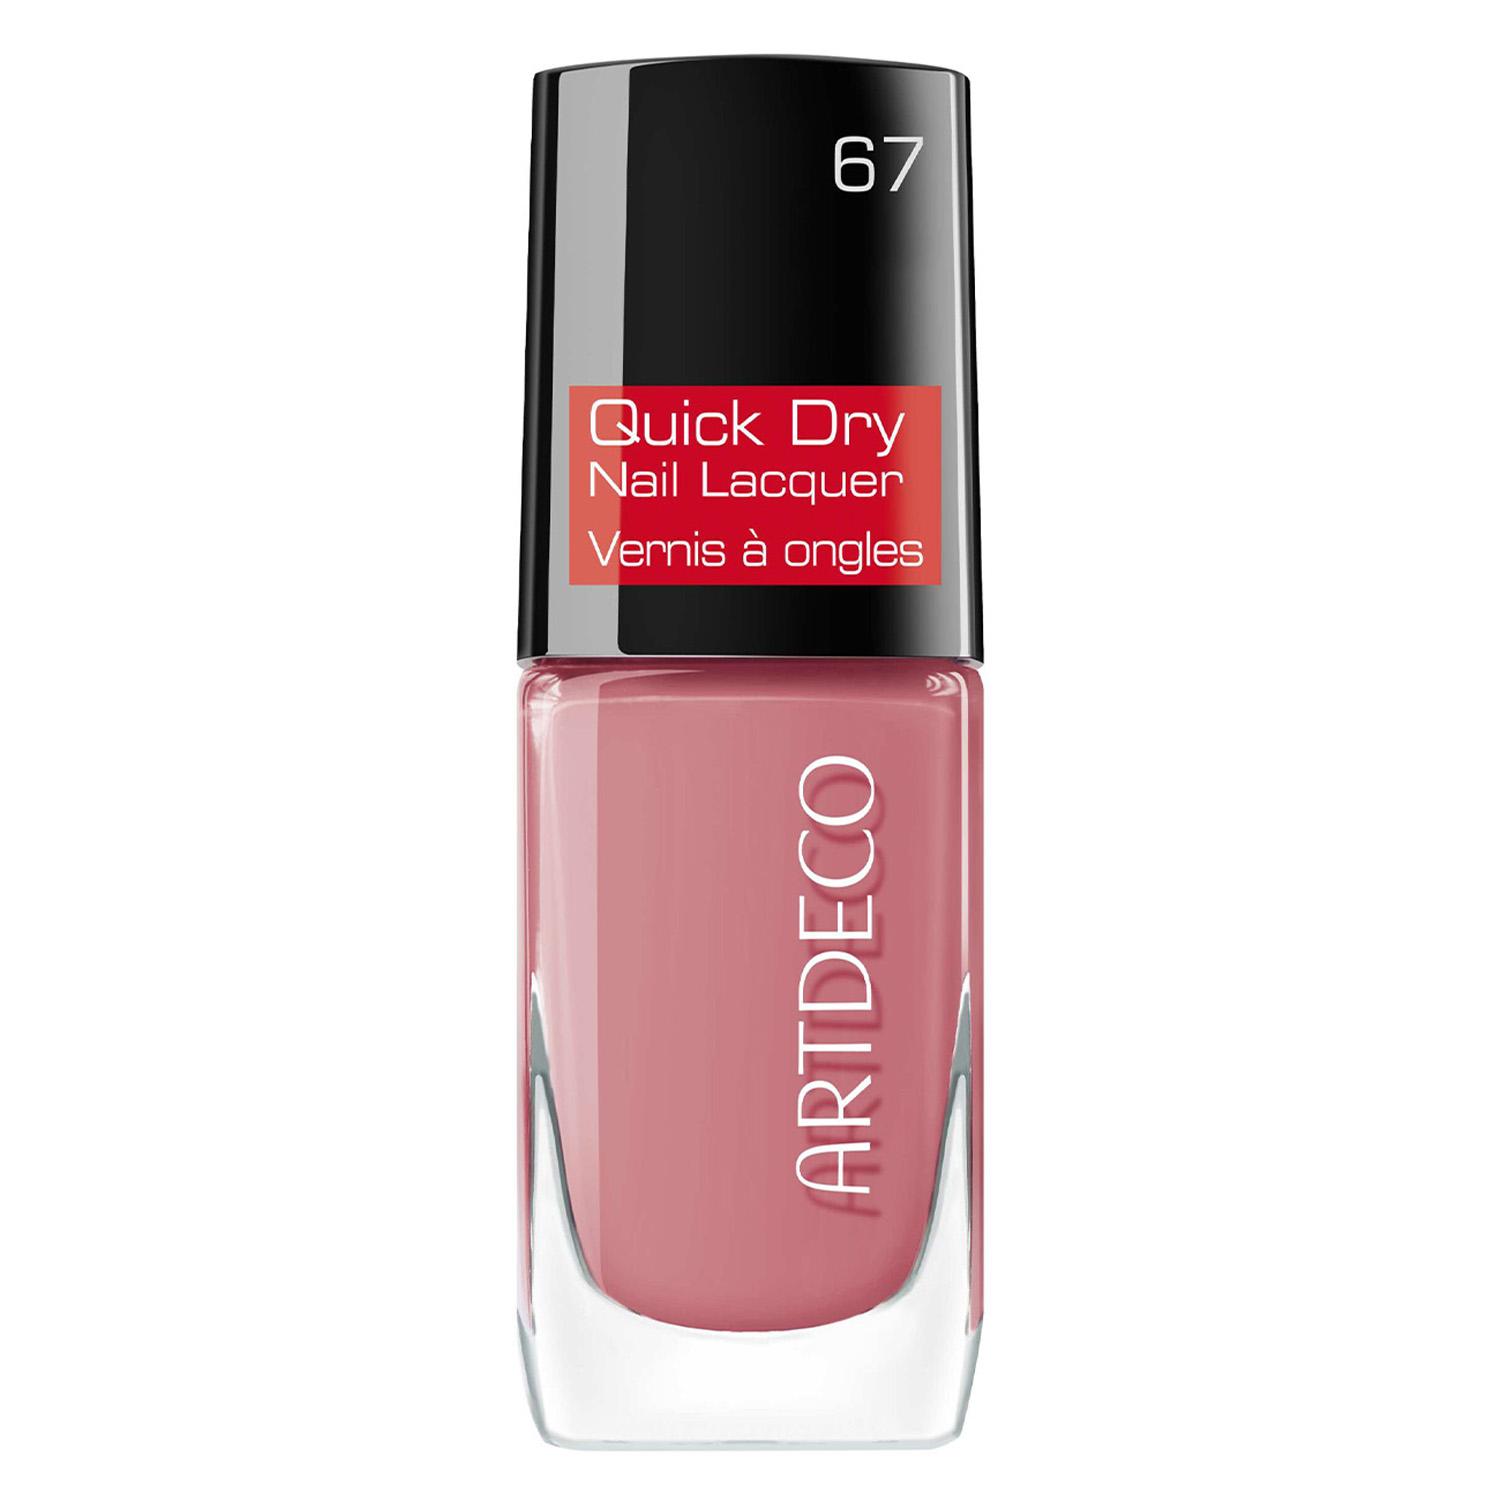 Quick Dry - Nail Lacquer Winter Blossom 67